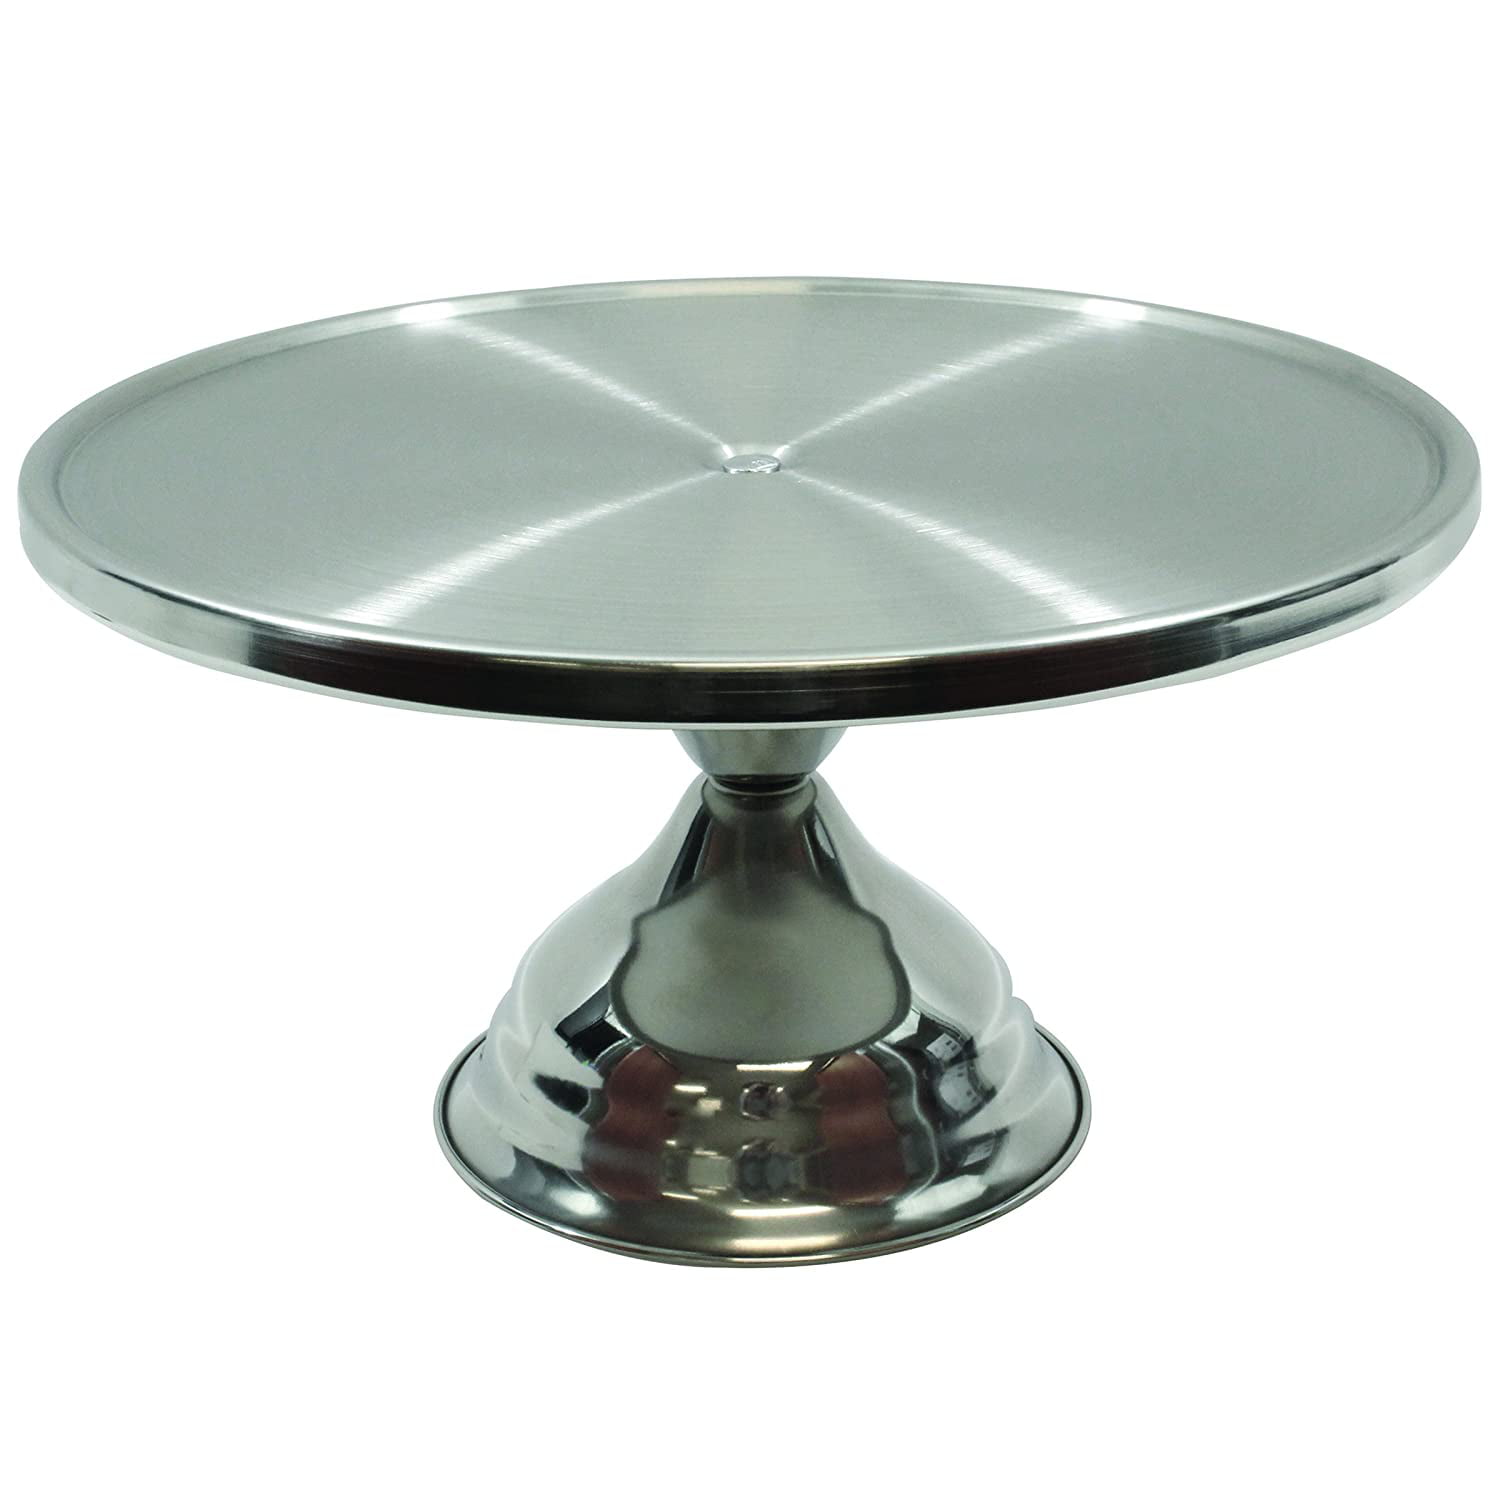 Winco CKS-13 Stainless Steel Round Cake Stand, 13-Inch,Set of 12 